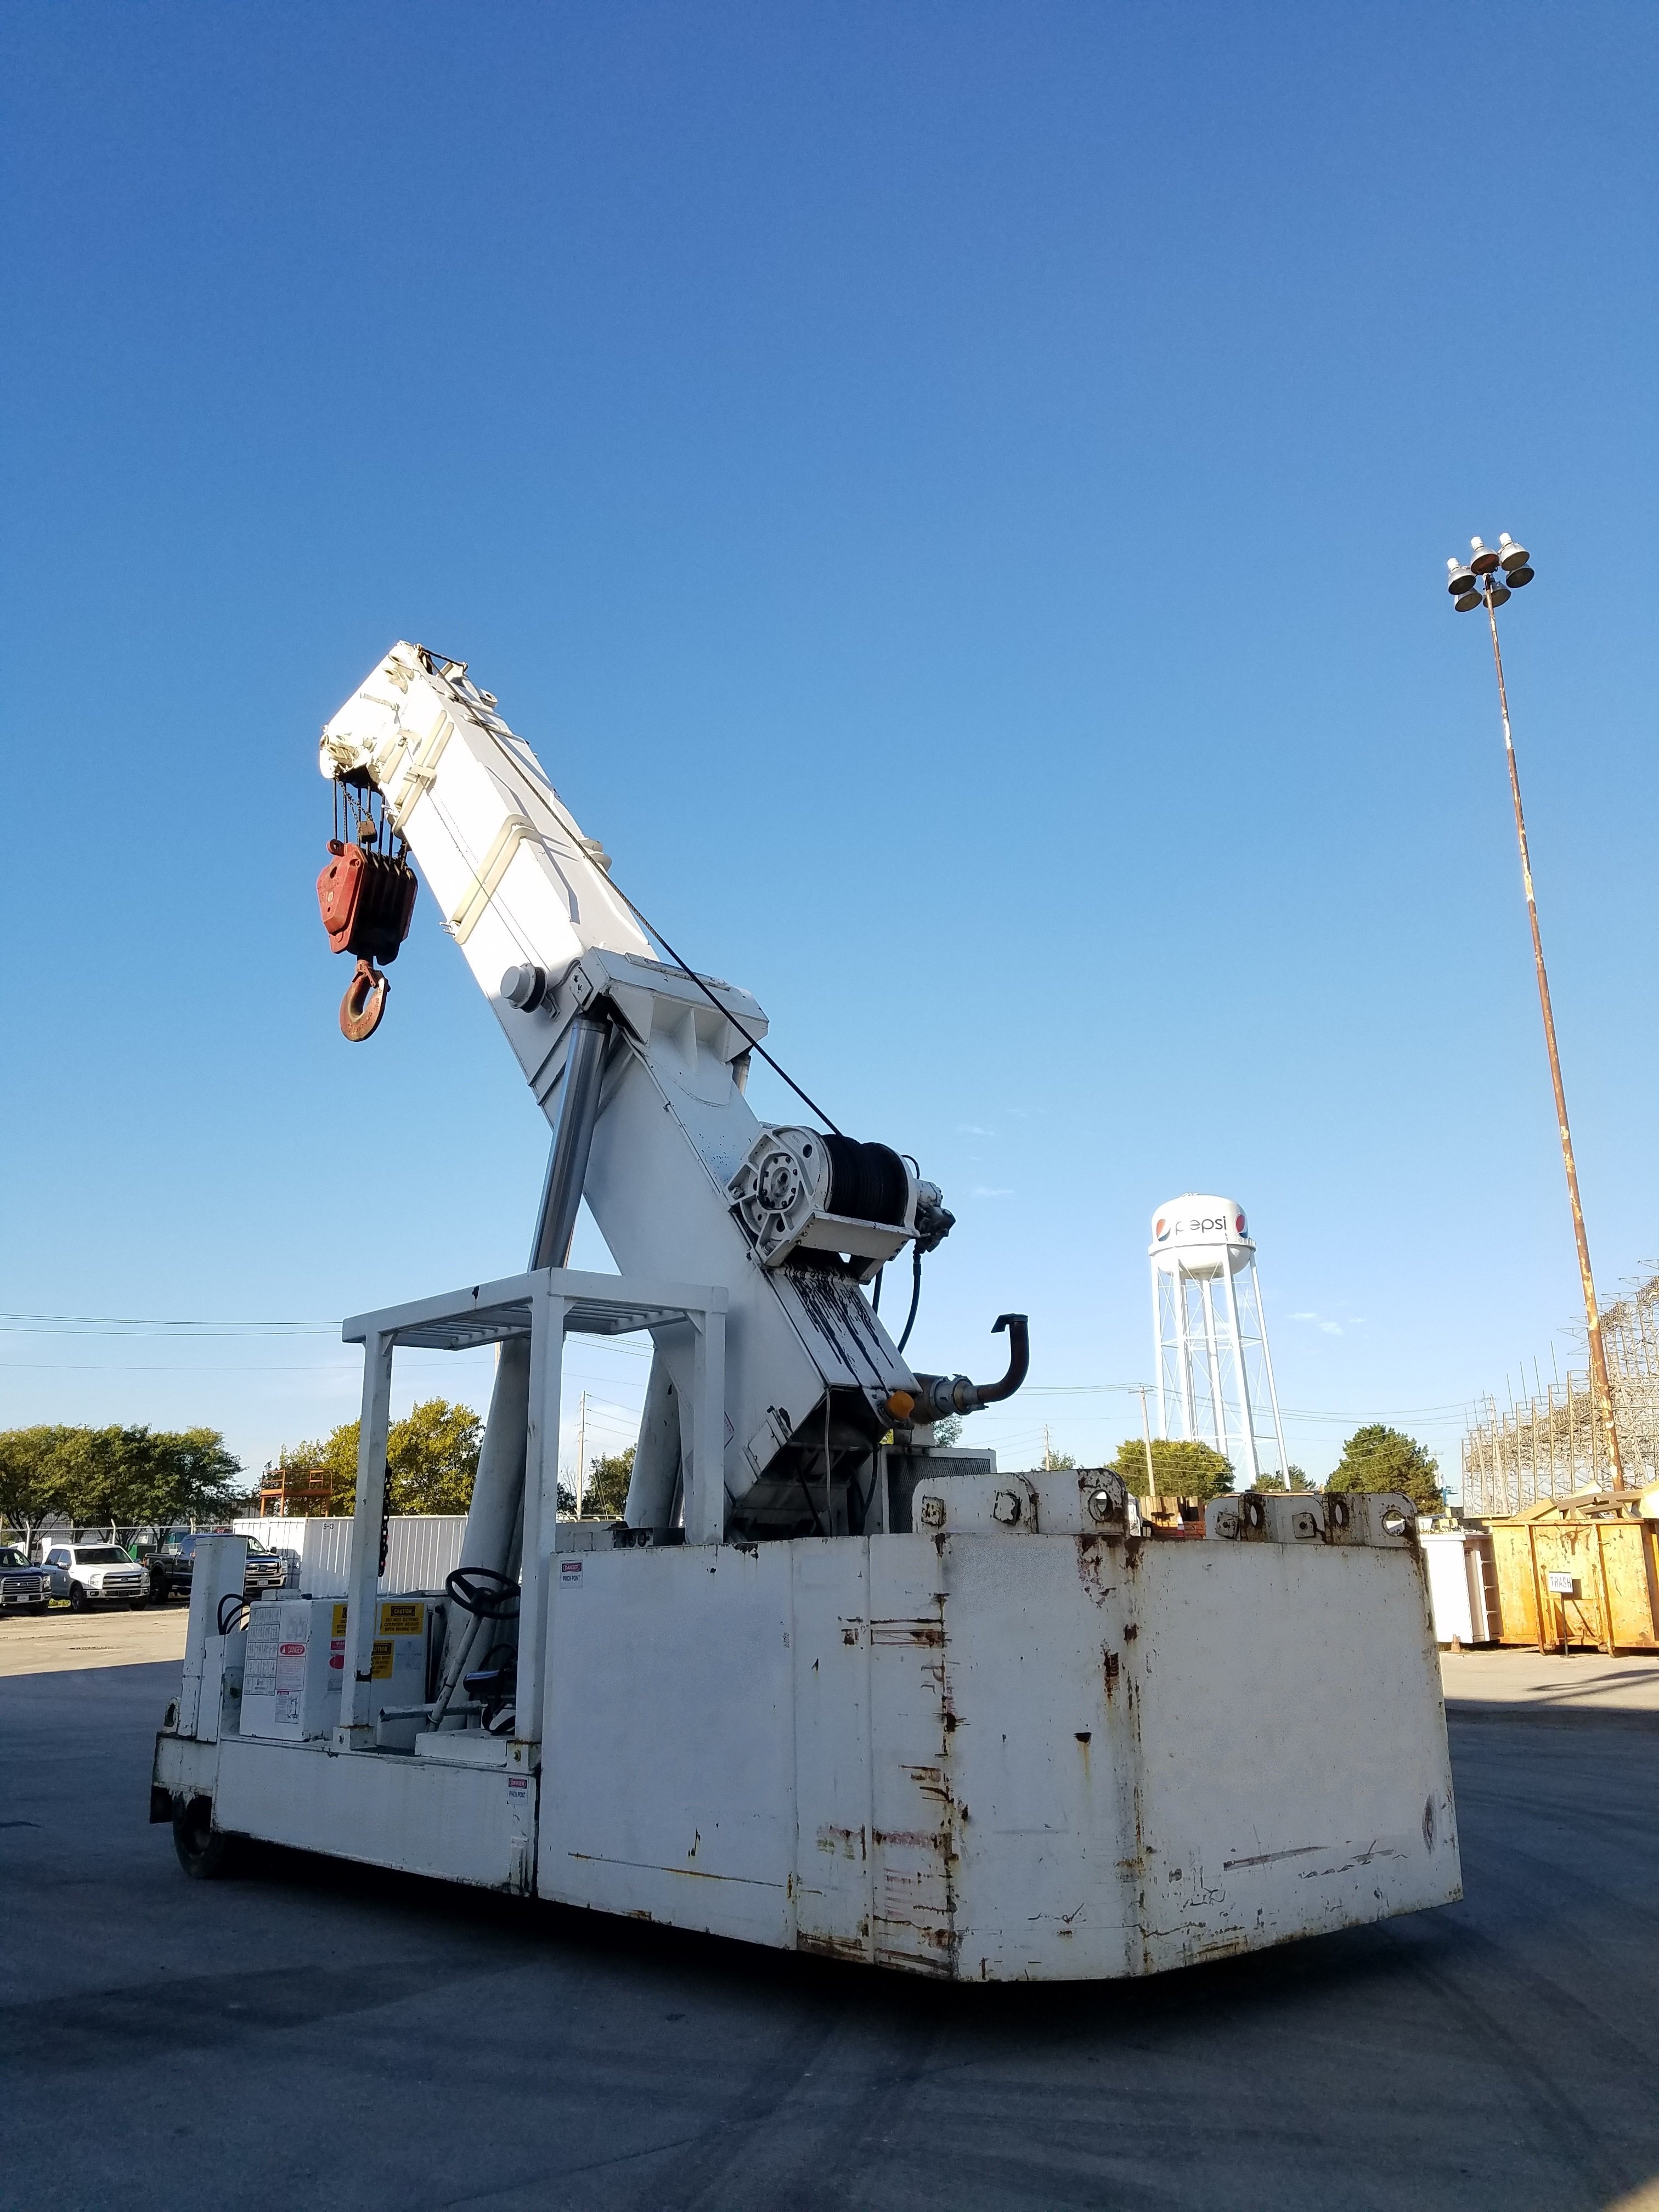 75 Ton Capacity Mobilift For Sale